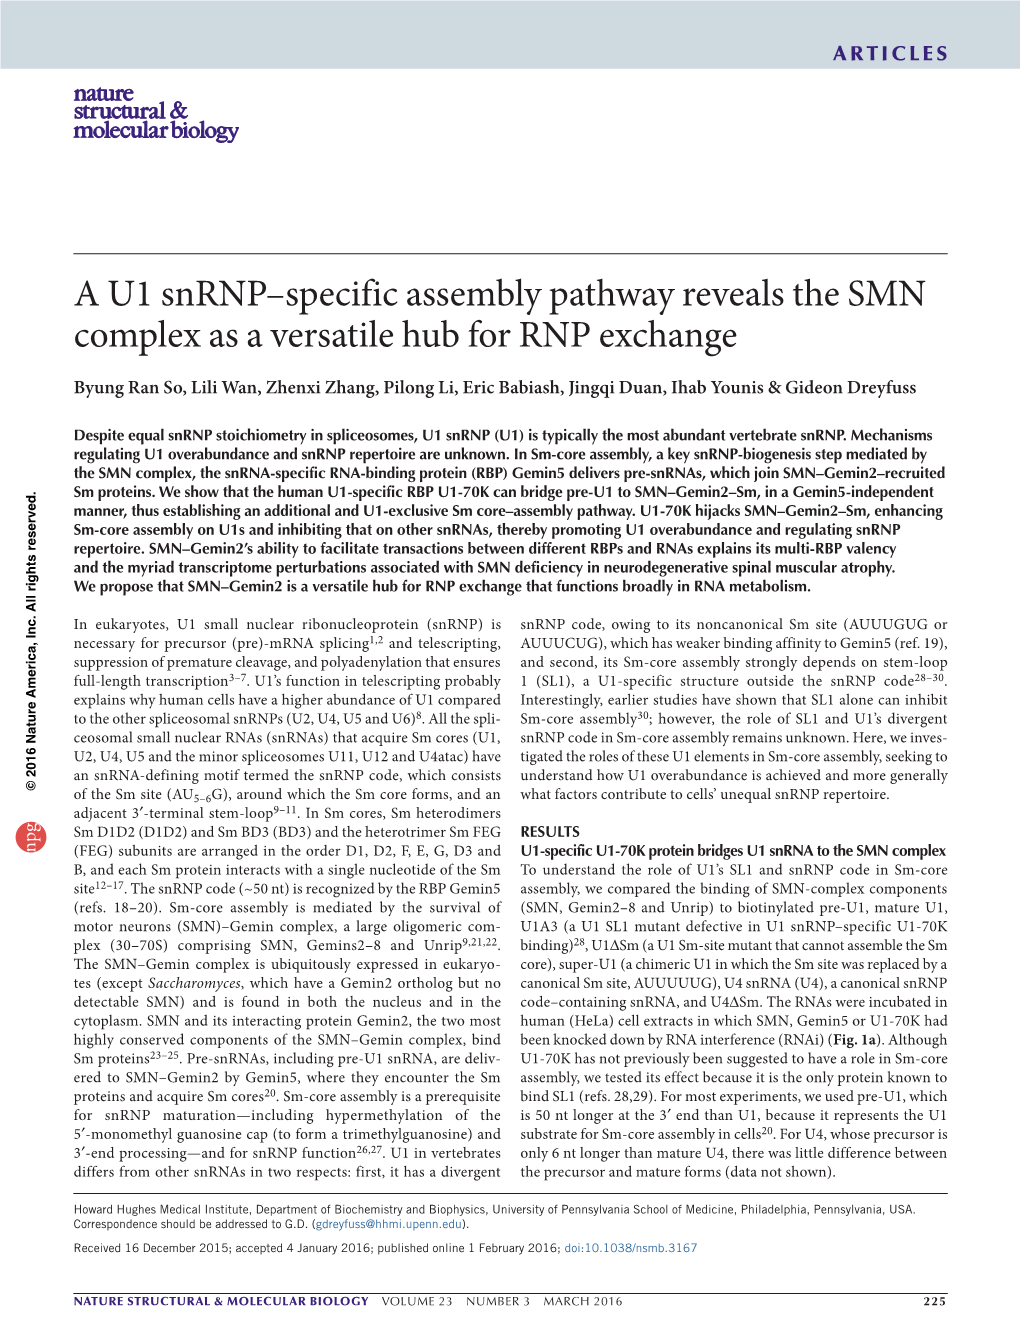 A U1 Snrnp–Specific Assembly Pathway Reveals the SMN Complex As a Versatile Hub for RNP Exchange